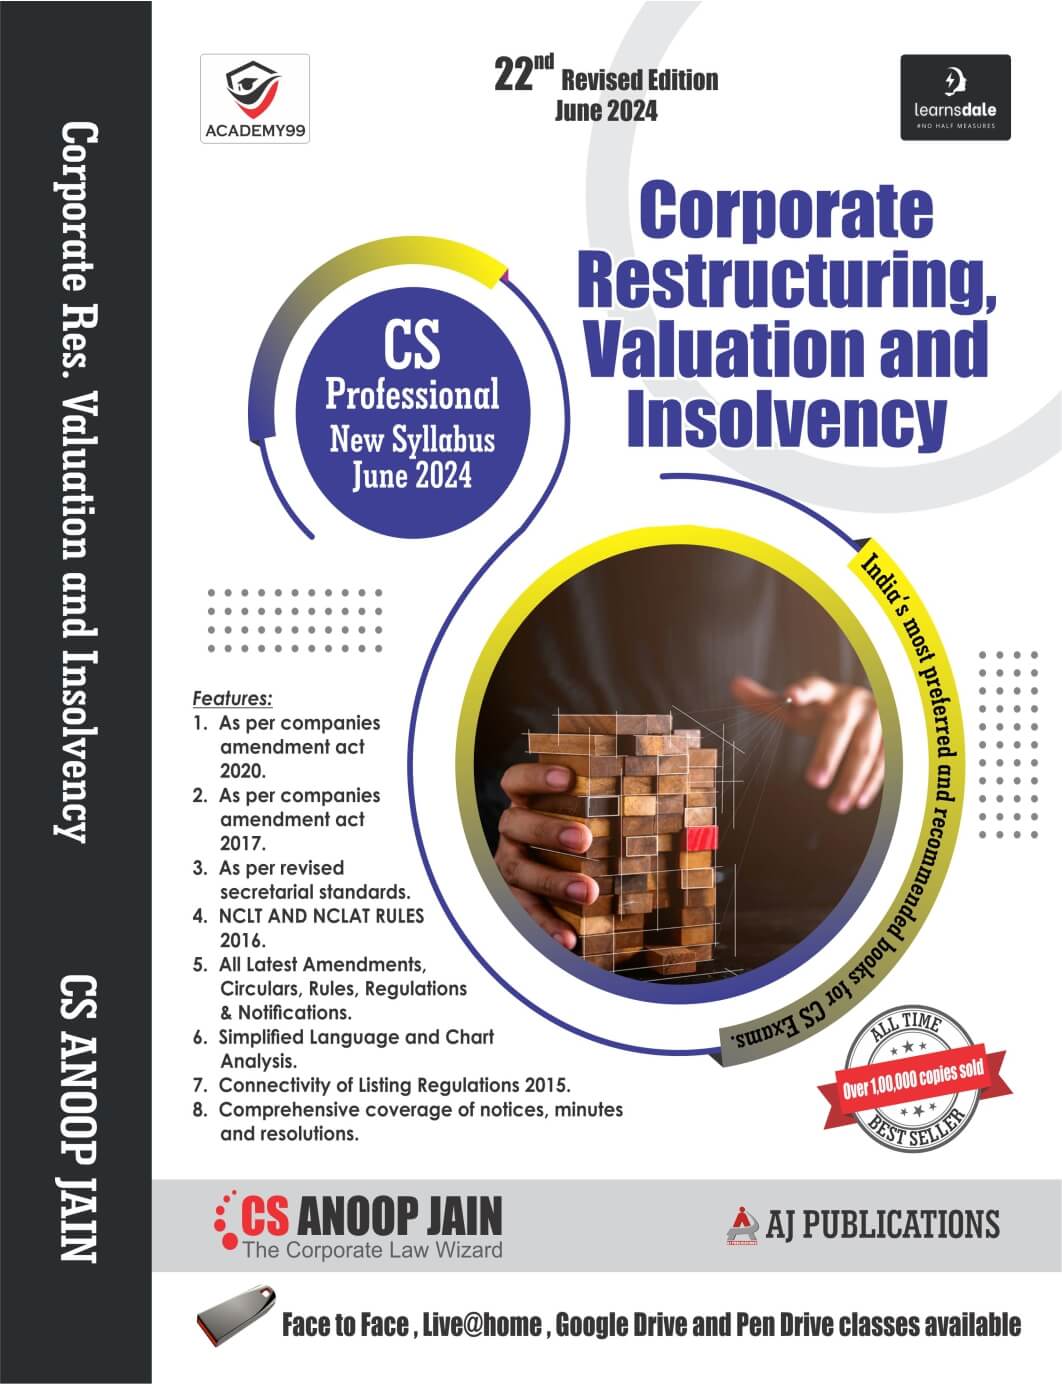 CS Professional New Syllabus Corporate Restructuring Valuation and Insolvency Book by CS Anoop Jain